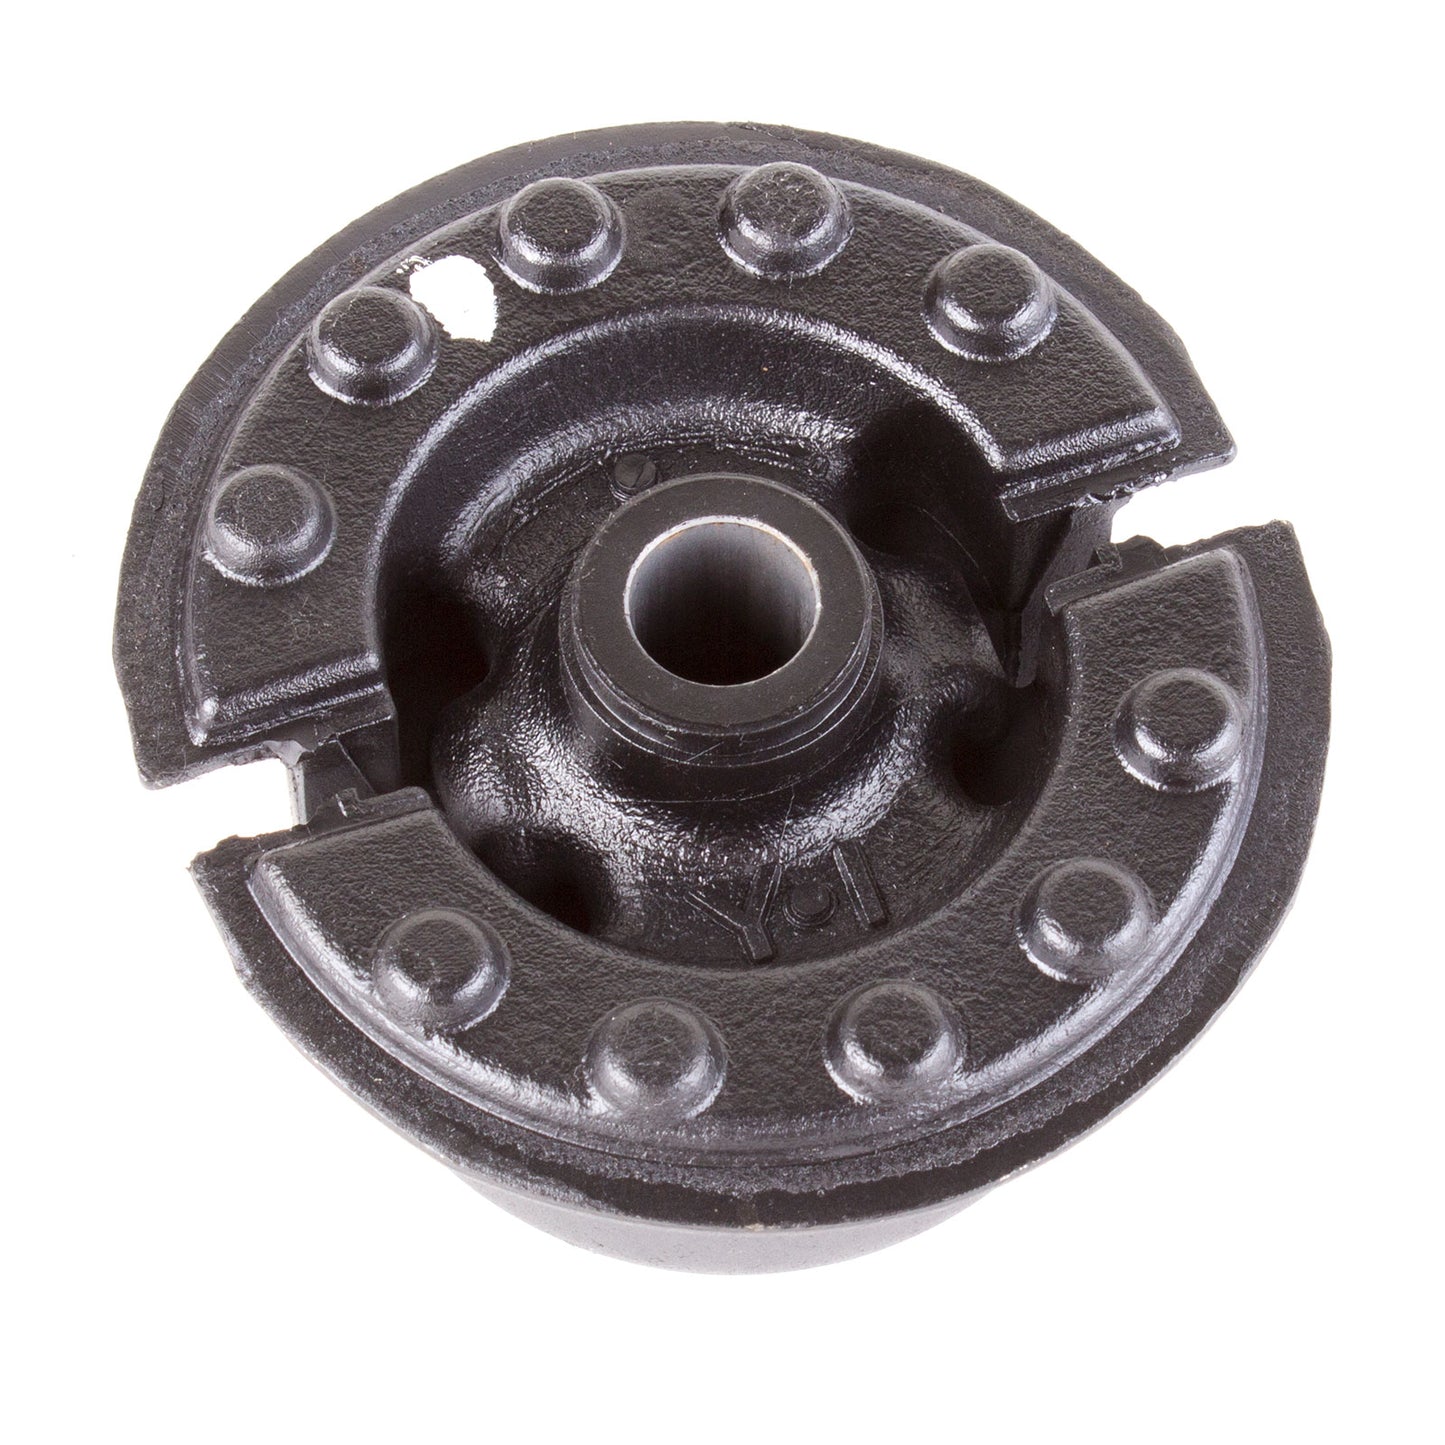 Mazda Competition differential bushing